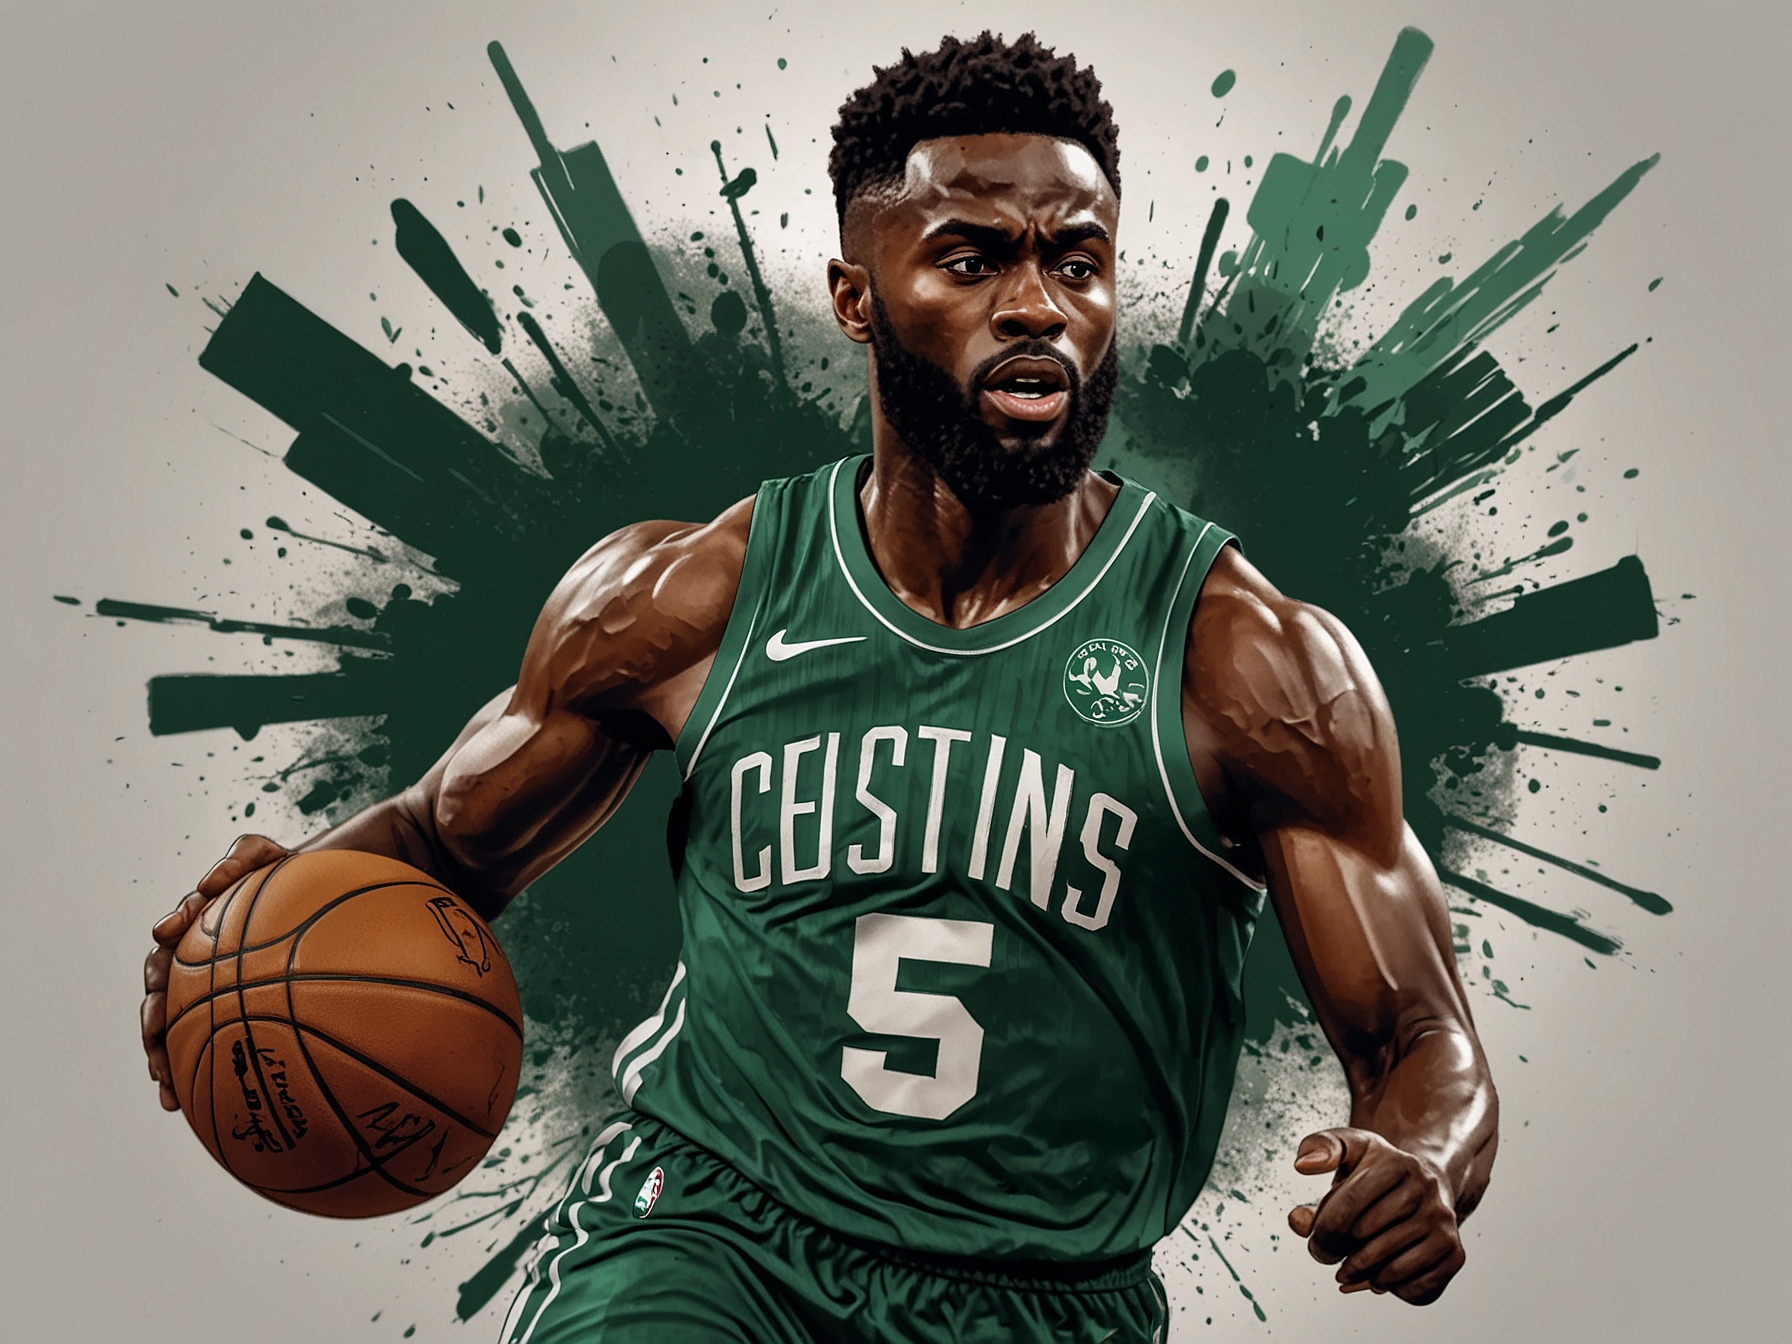 Jaylen Brown, clad in the Celtics' jersey, drives towards the basket with fierce determination, showcasing the skill and agility that earned him the NBA Finals MVP award.